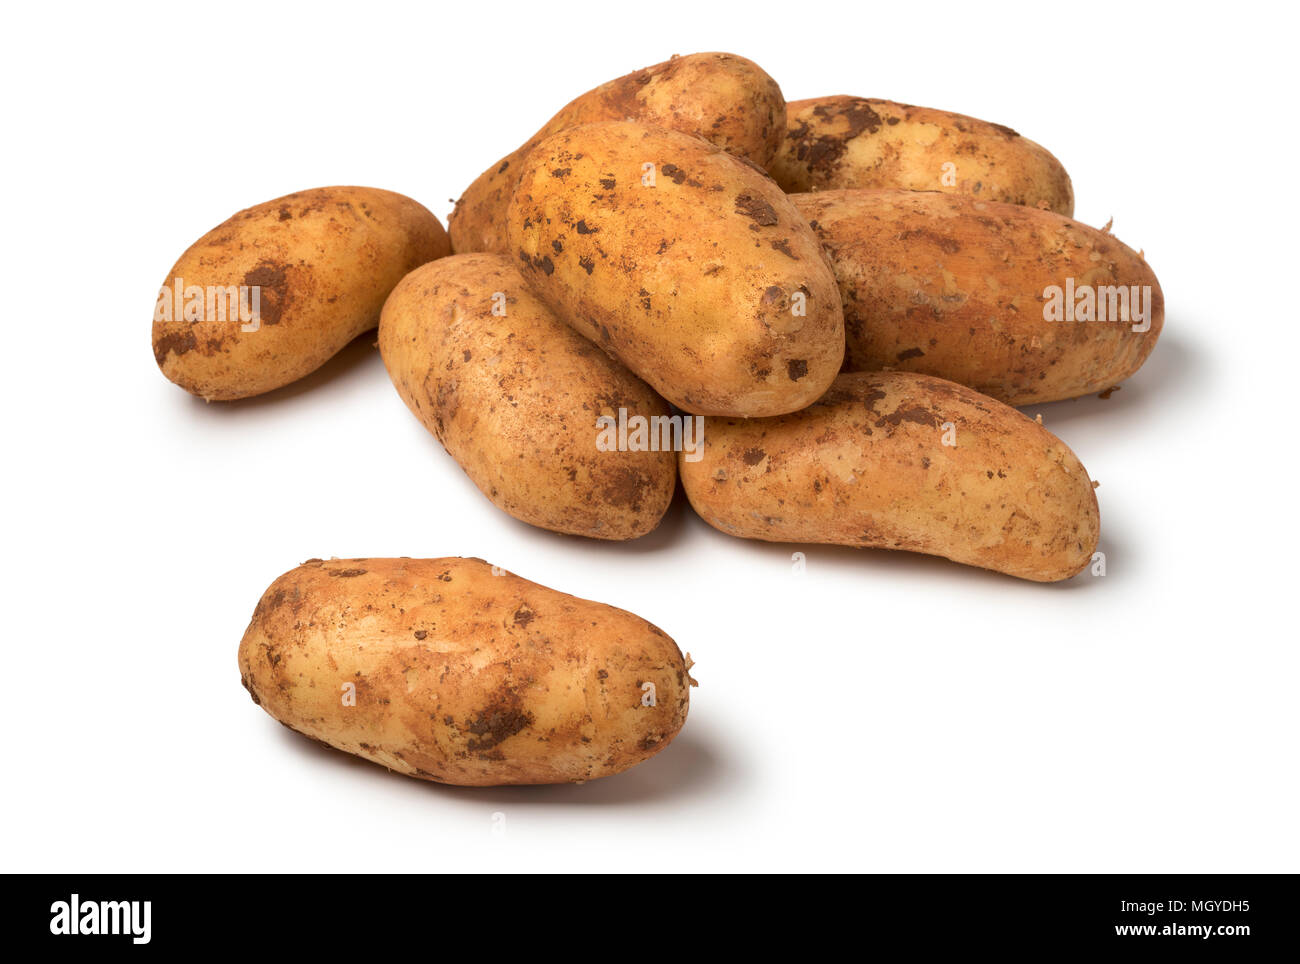 Fresh picked raw whole Diamant potatoes from Cyprus isolated on white background Stock Photo